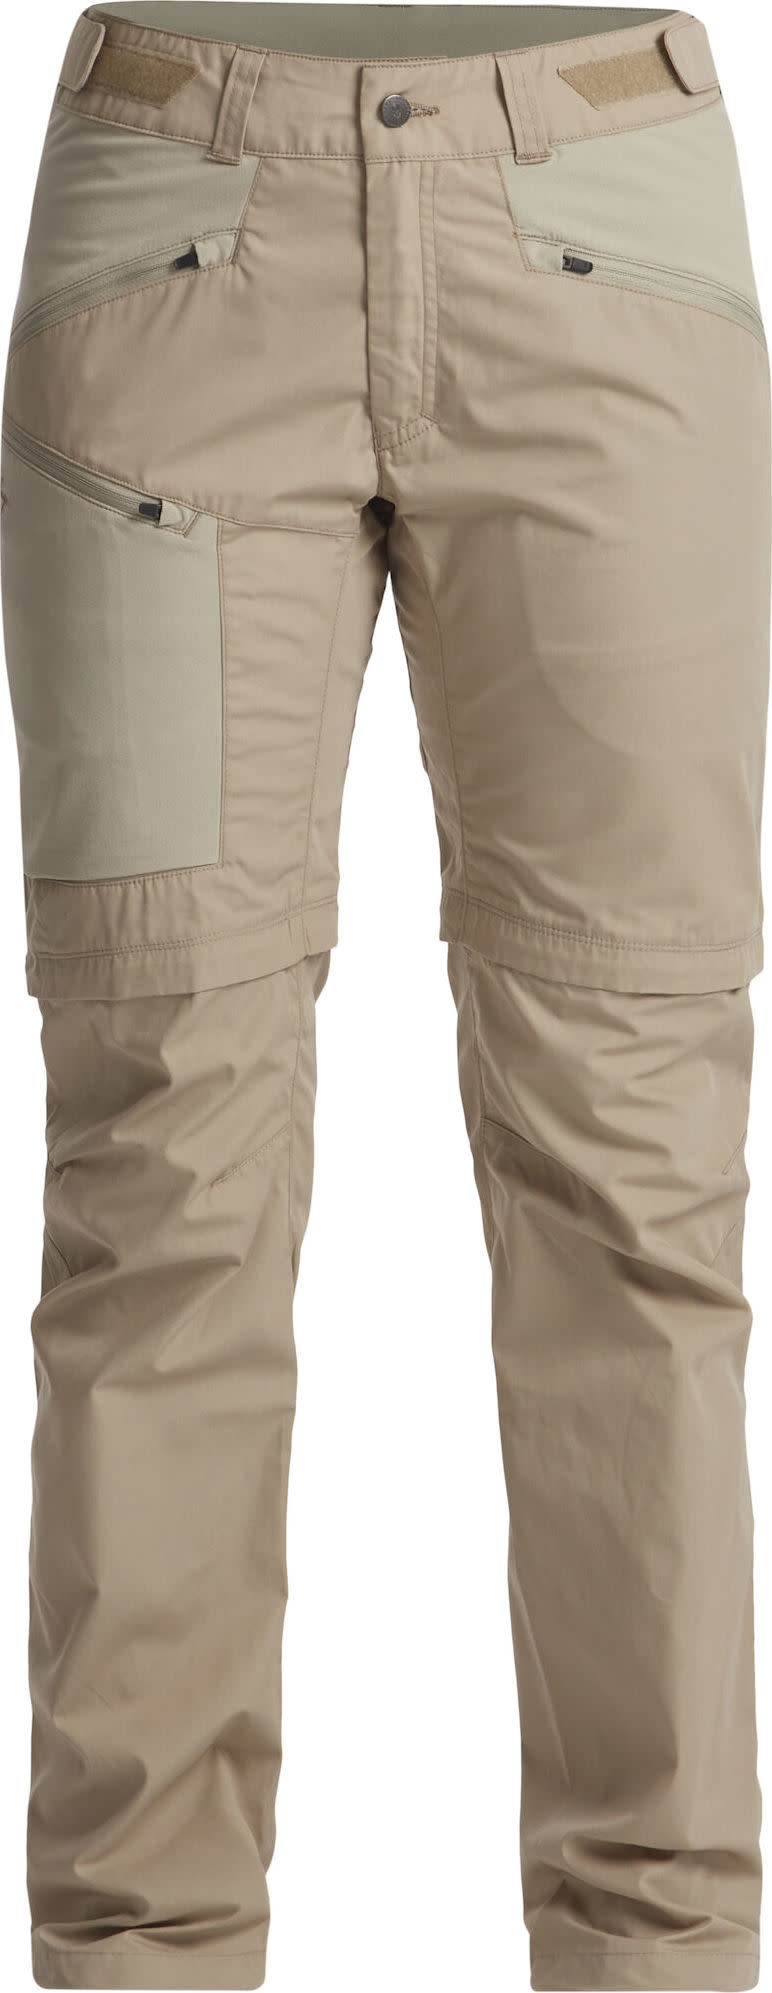 Lundhags Men’s Tived Zip-Off Pant  Sand